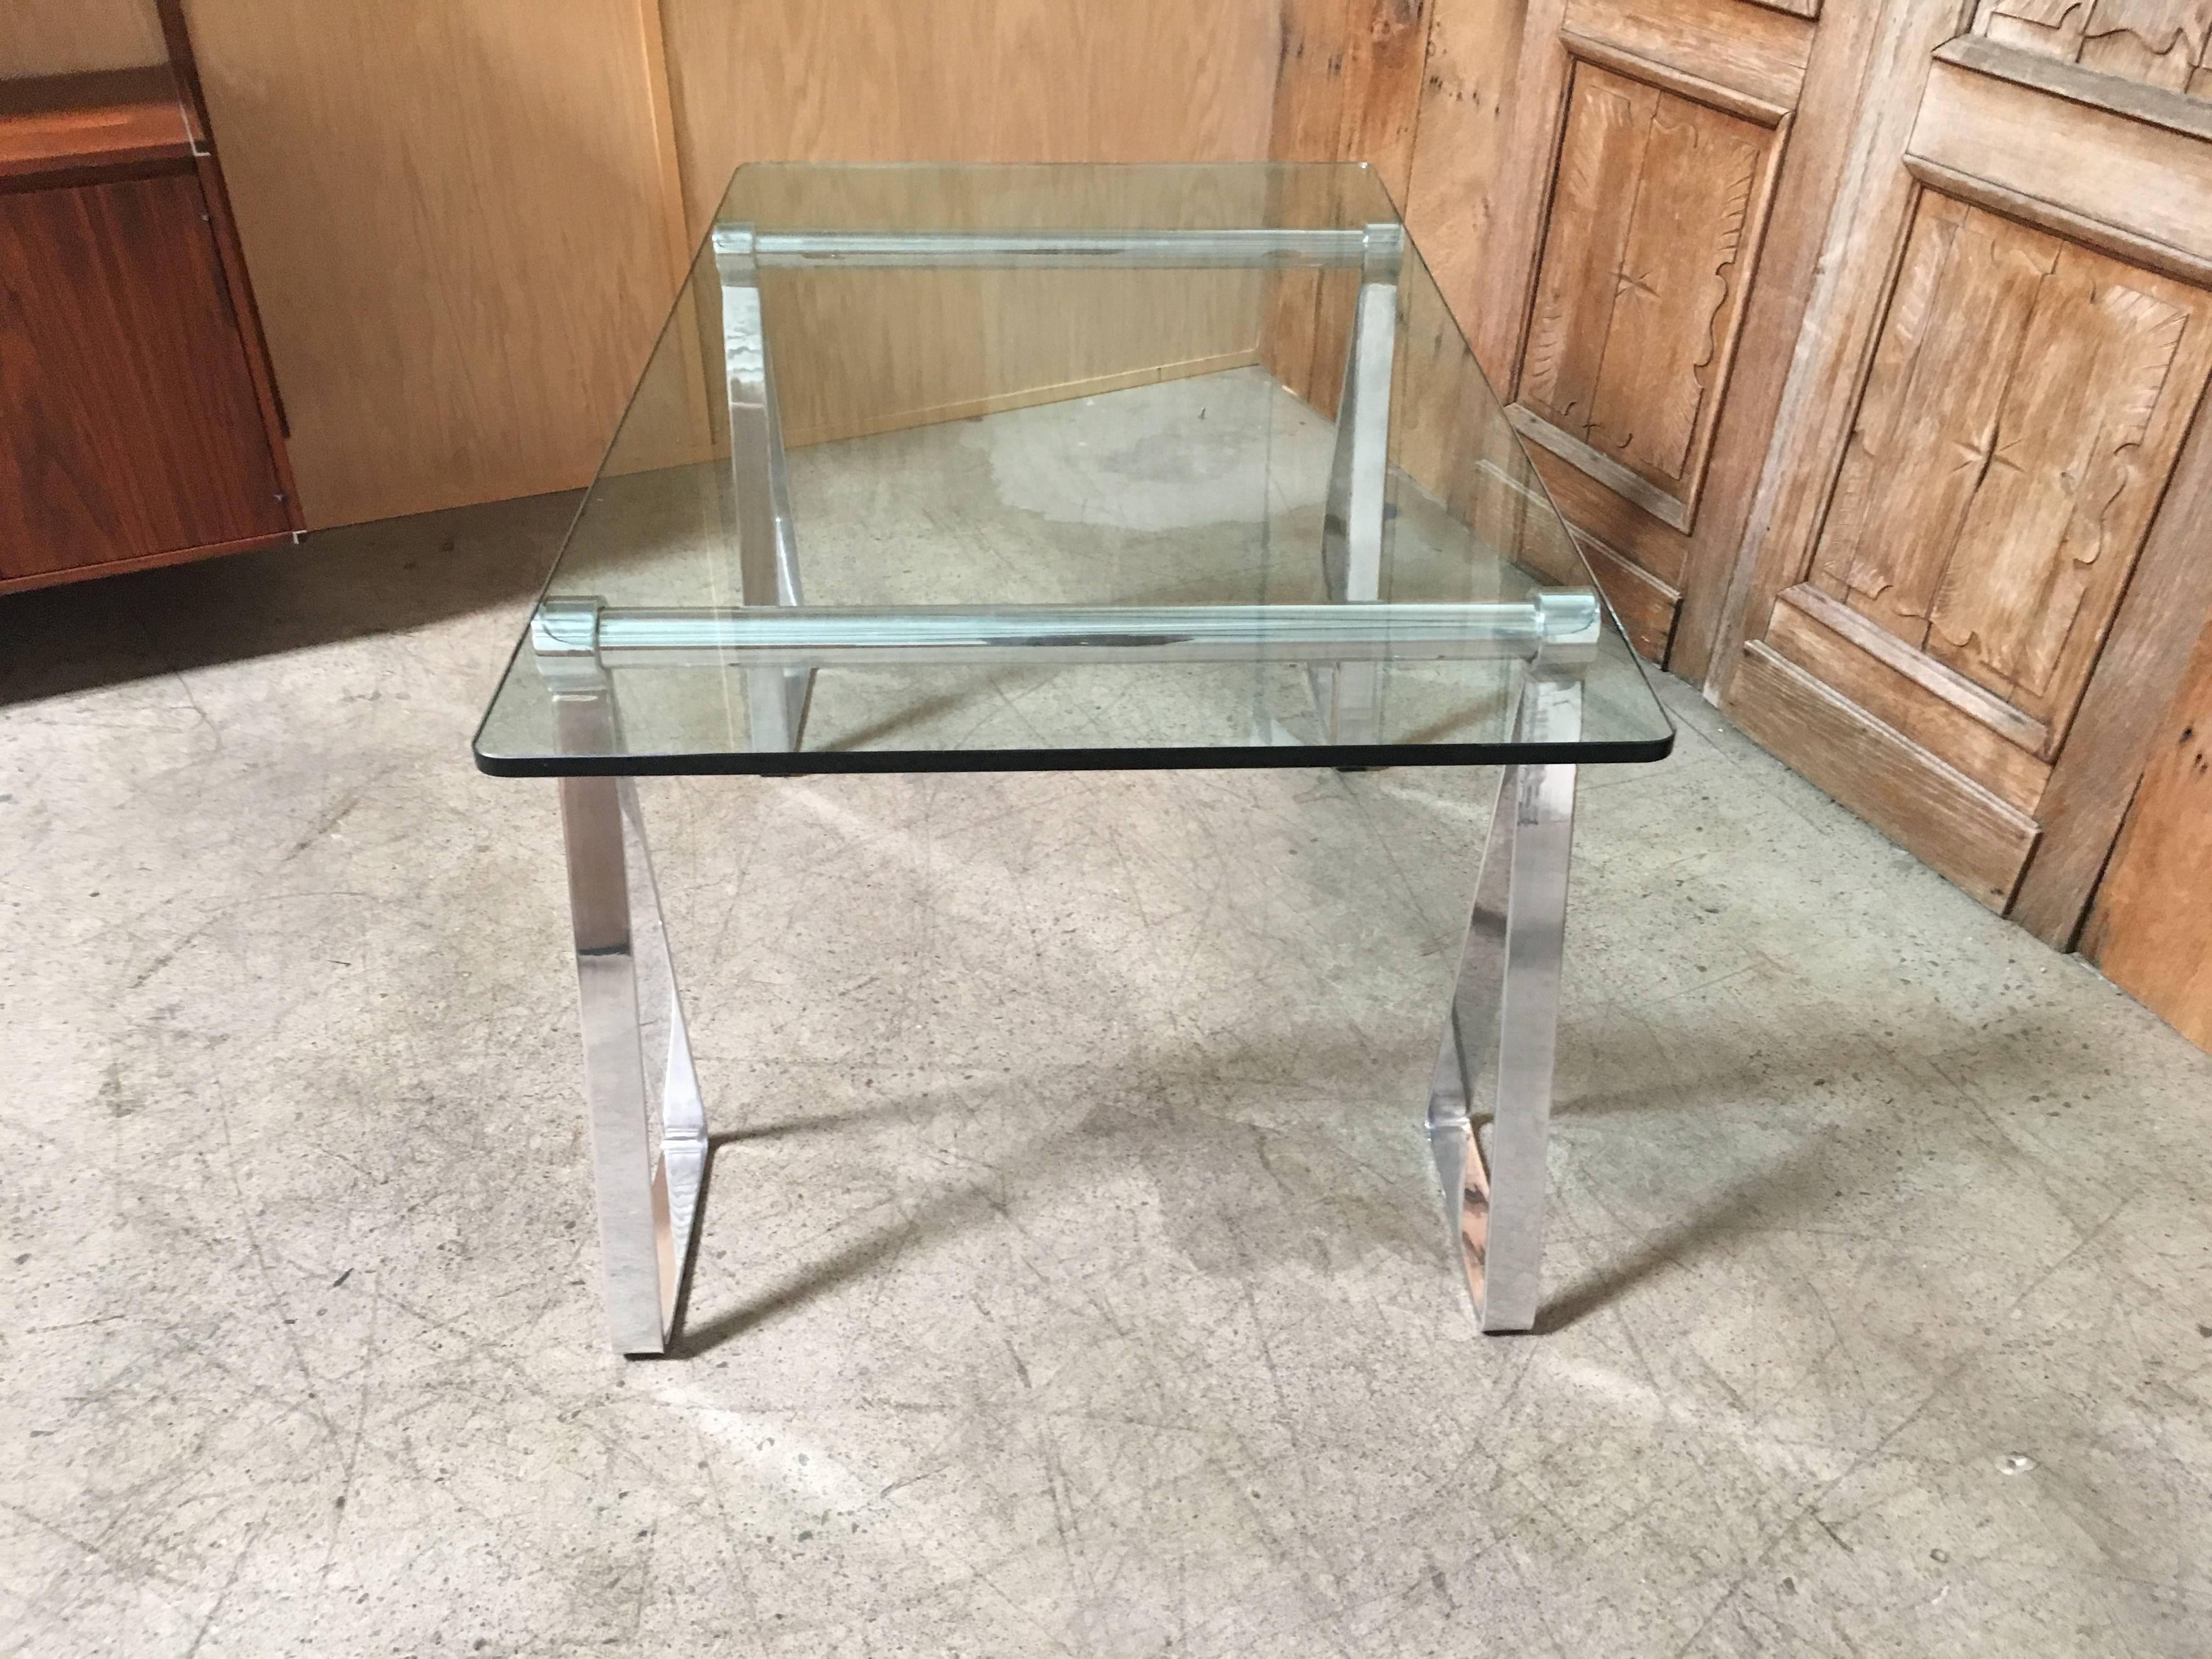 North American Mirrored Polished Aluminum Sawhorse Table Desk